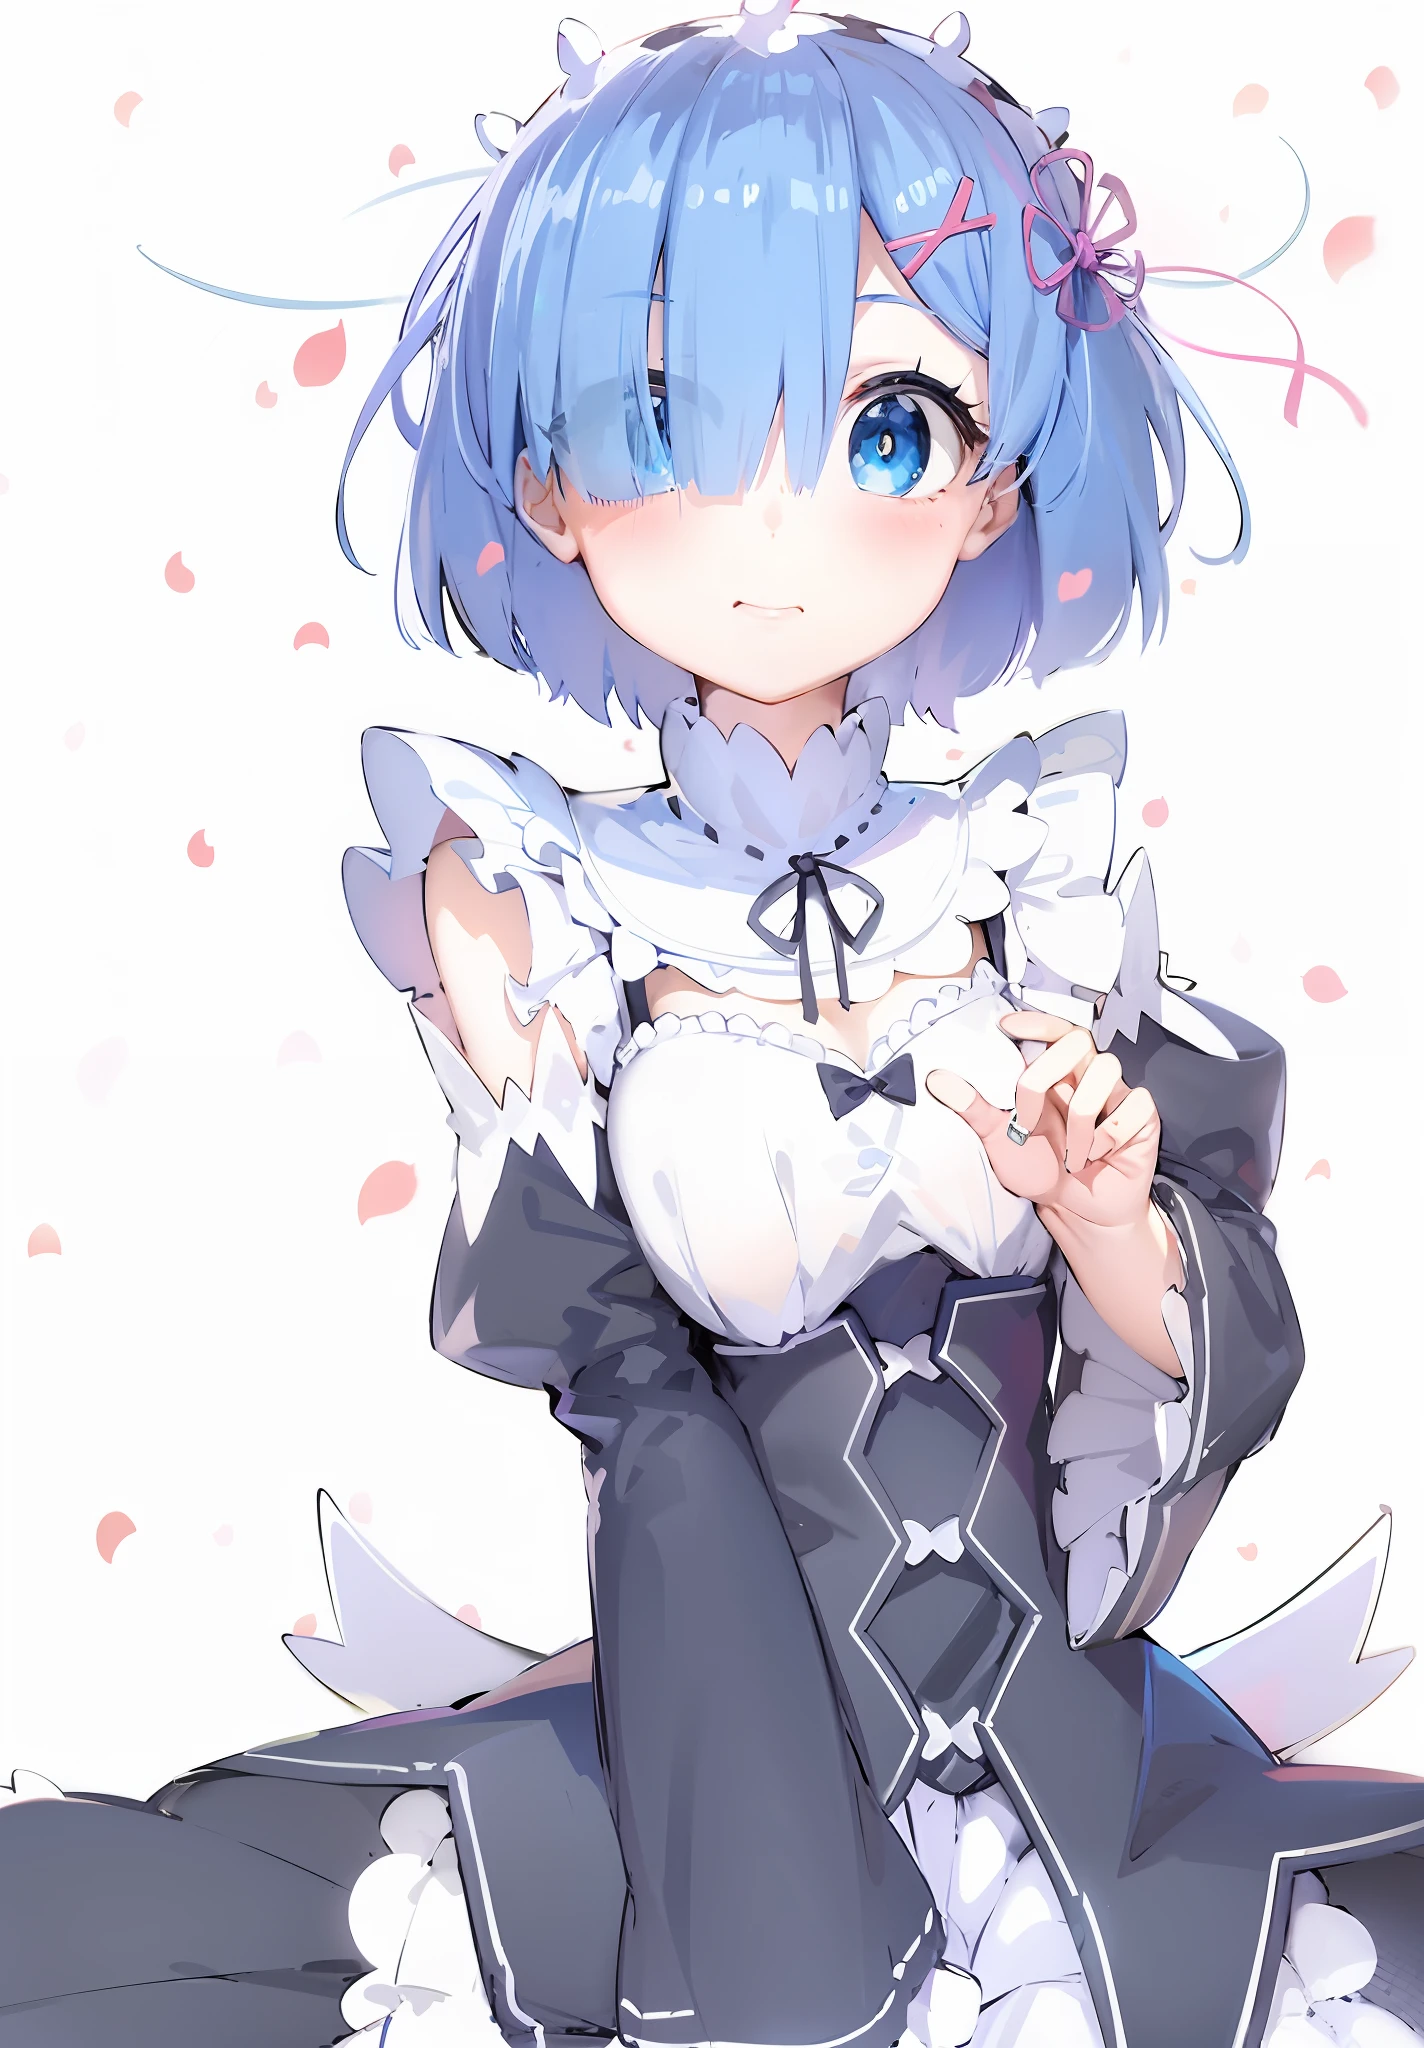 anime girl with blue hair and blue eyes sitting on the ground, Rem Rezero, loli in dress, small curvaceous loli, anime moe art style, small  girl, cute anime waifu in a nice dress, cirno touhou, Splash art anime Loli, an anime portrait of cirno, the anime girl is crouching, 